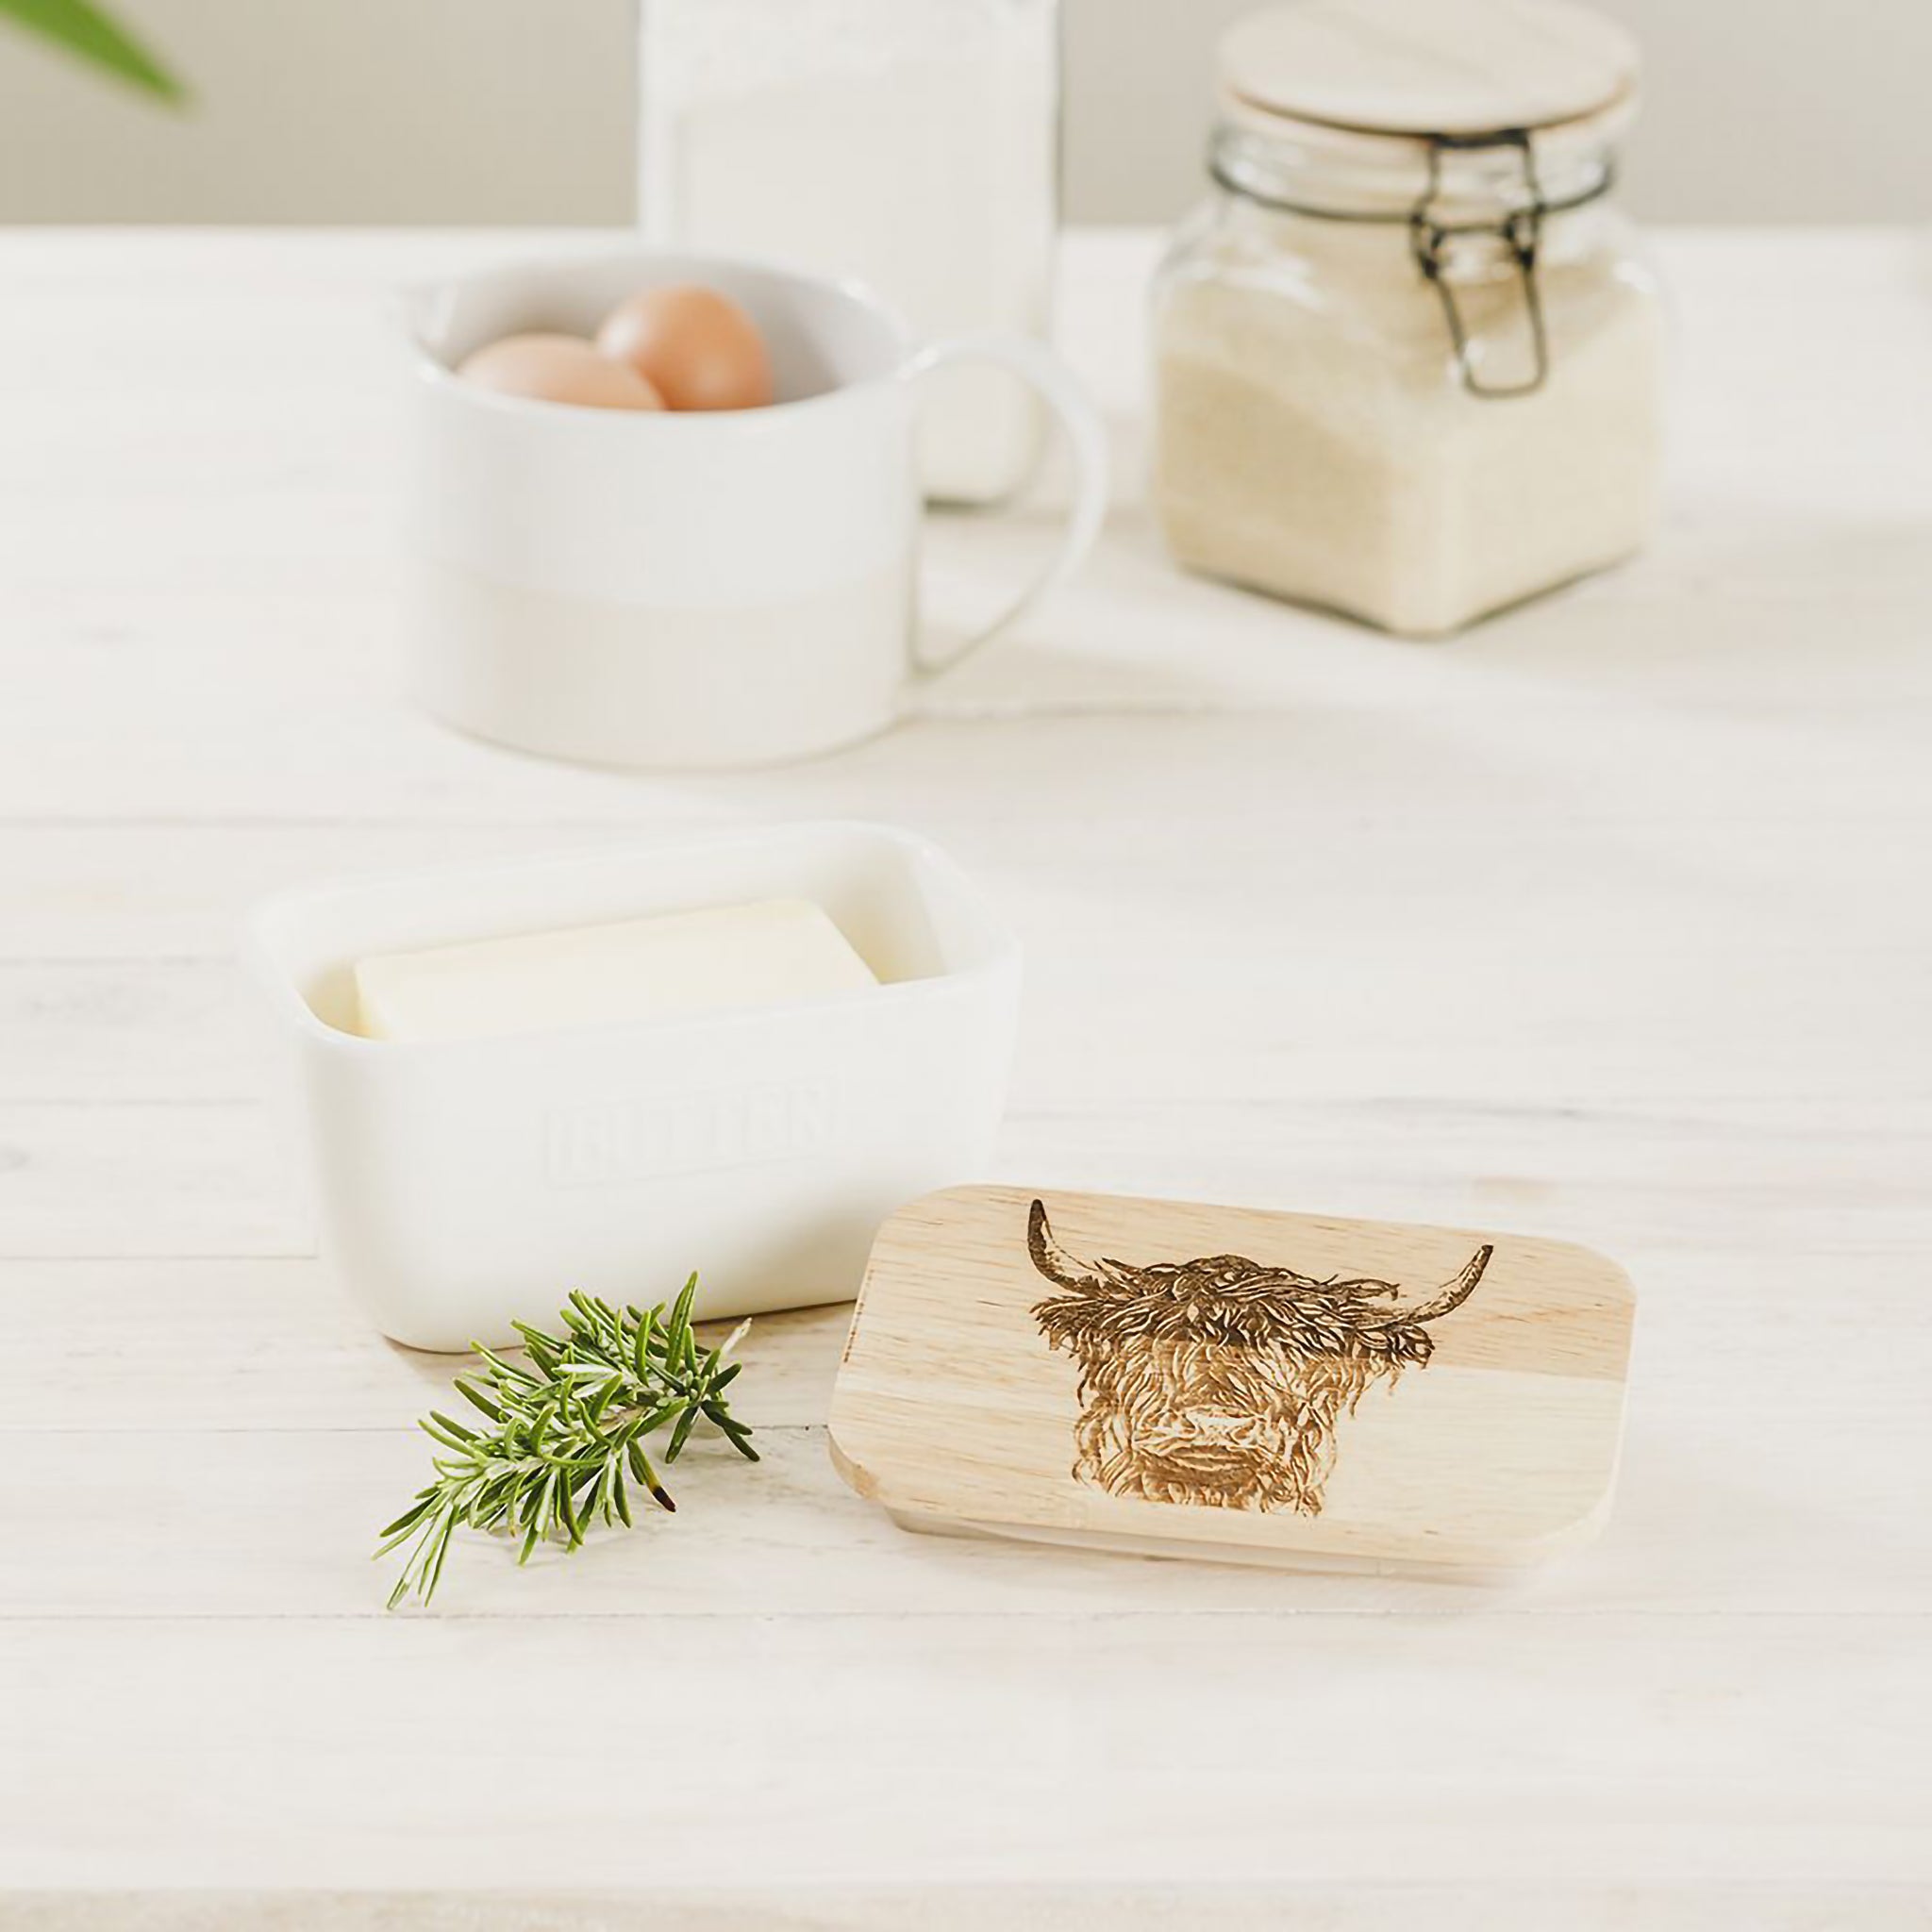 White ceramic butter dish with a wooden lid engraved with a Highland cow staged on a table with butter and rosemary